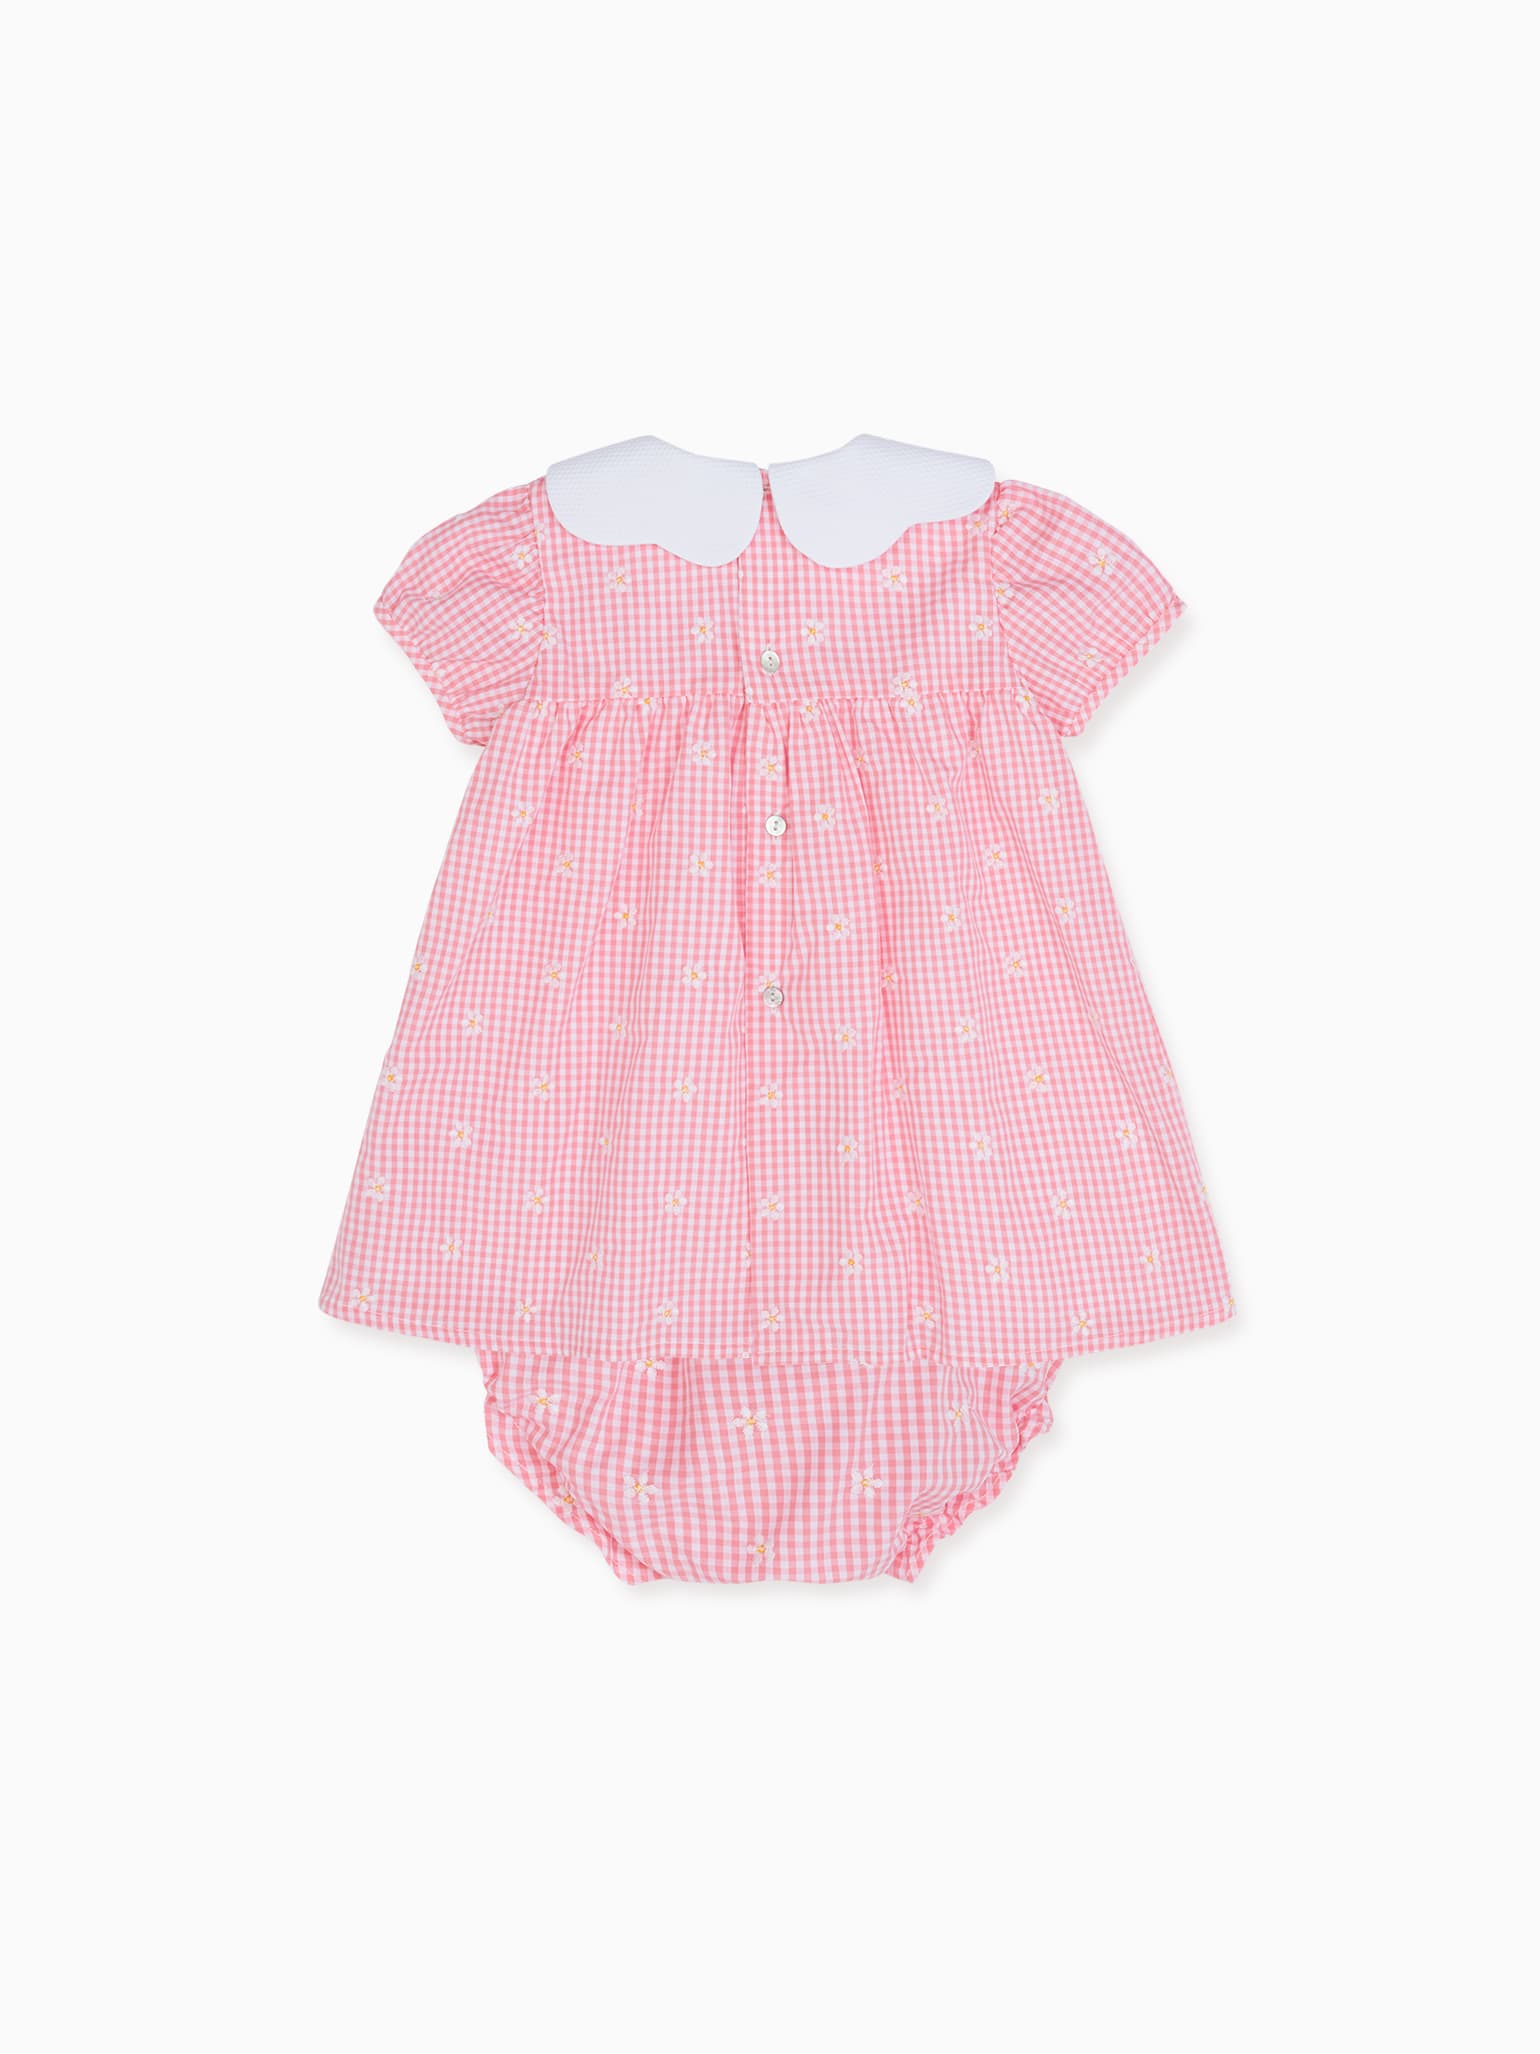 Pink Gingham Hestia Embroidered Baby Girl Set